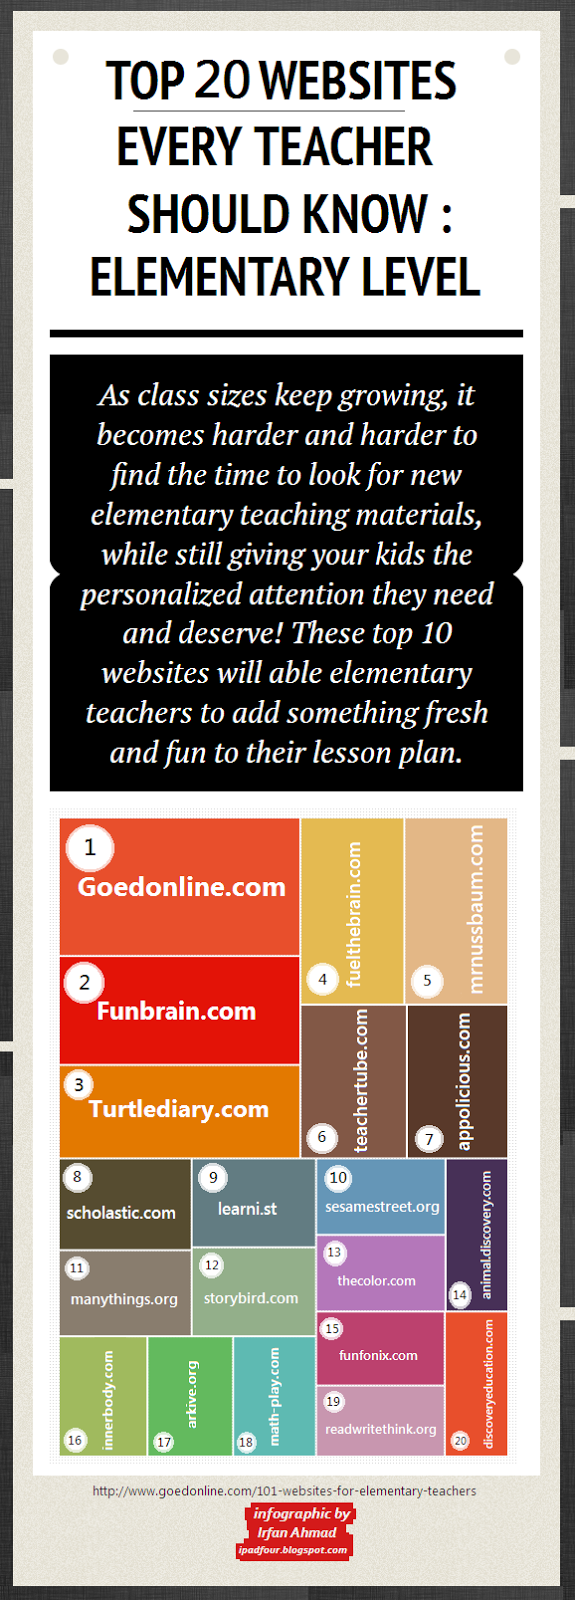 Top 20 Websites Every Teacher Should Know